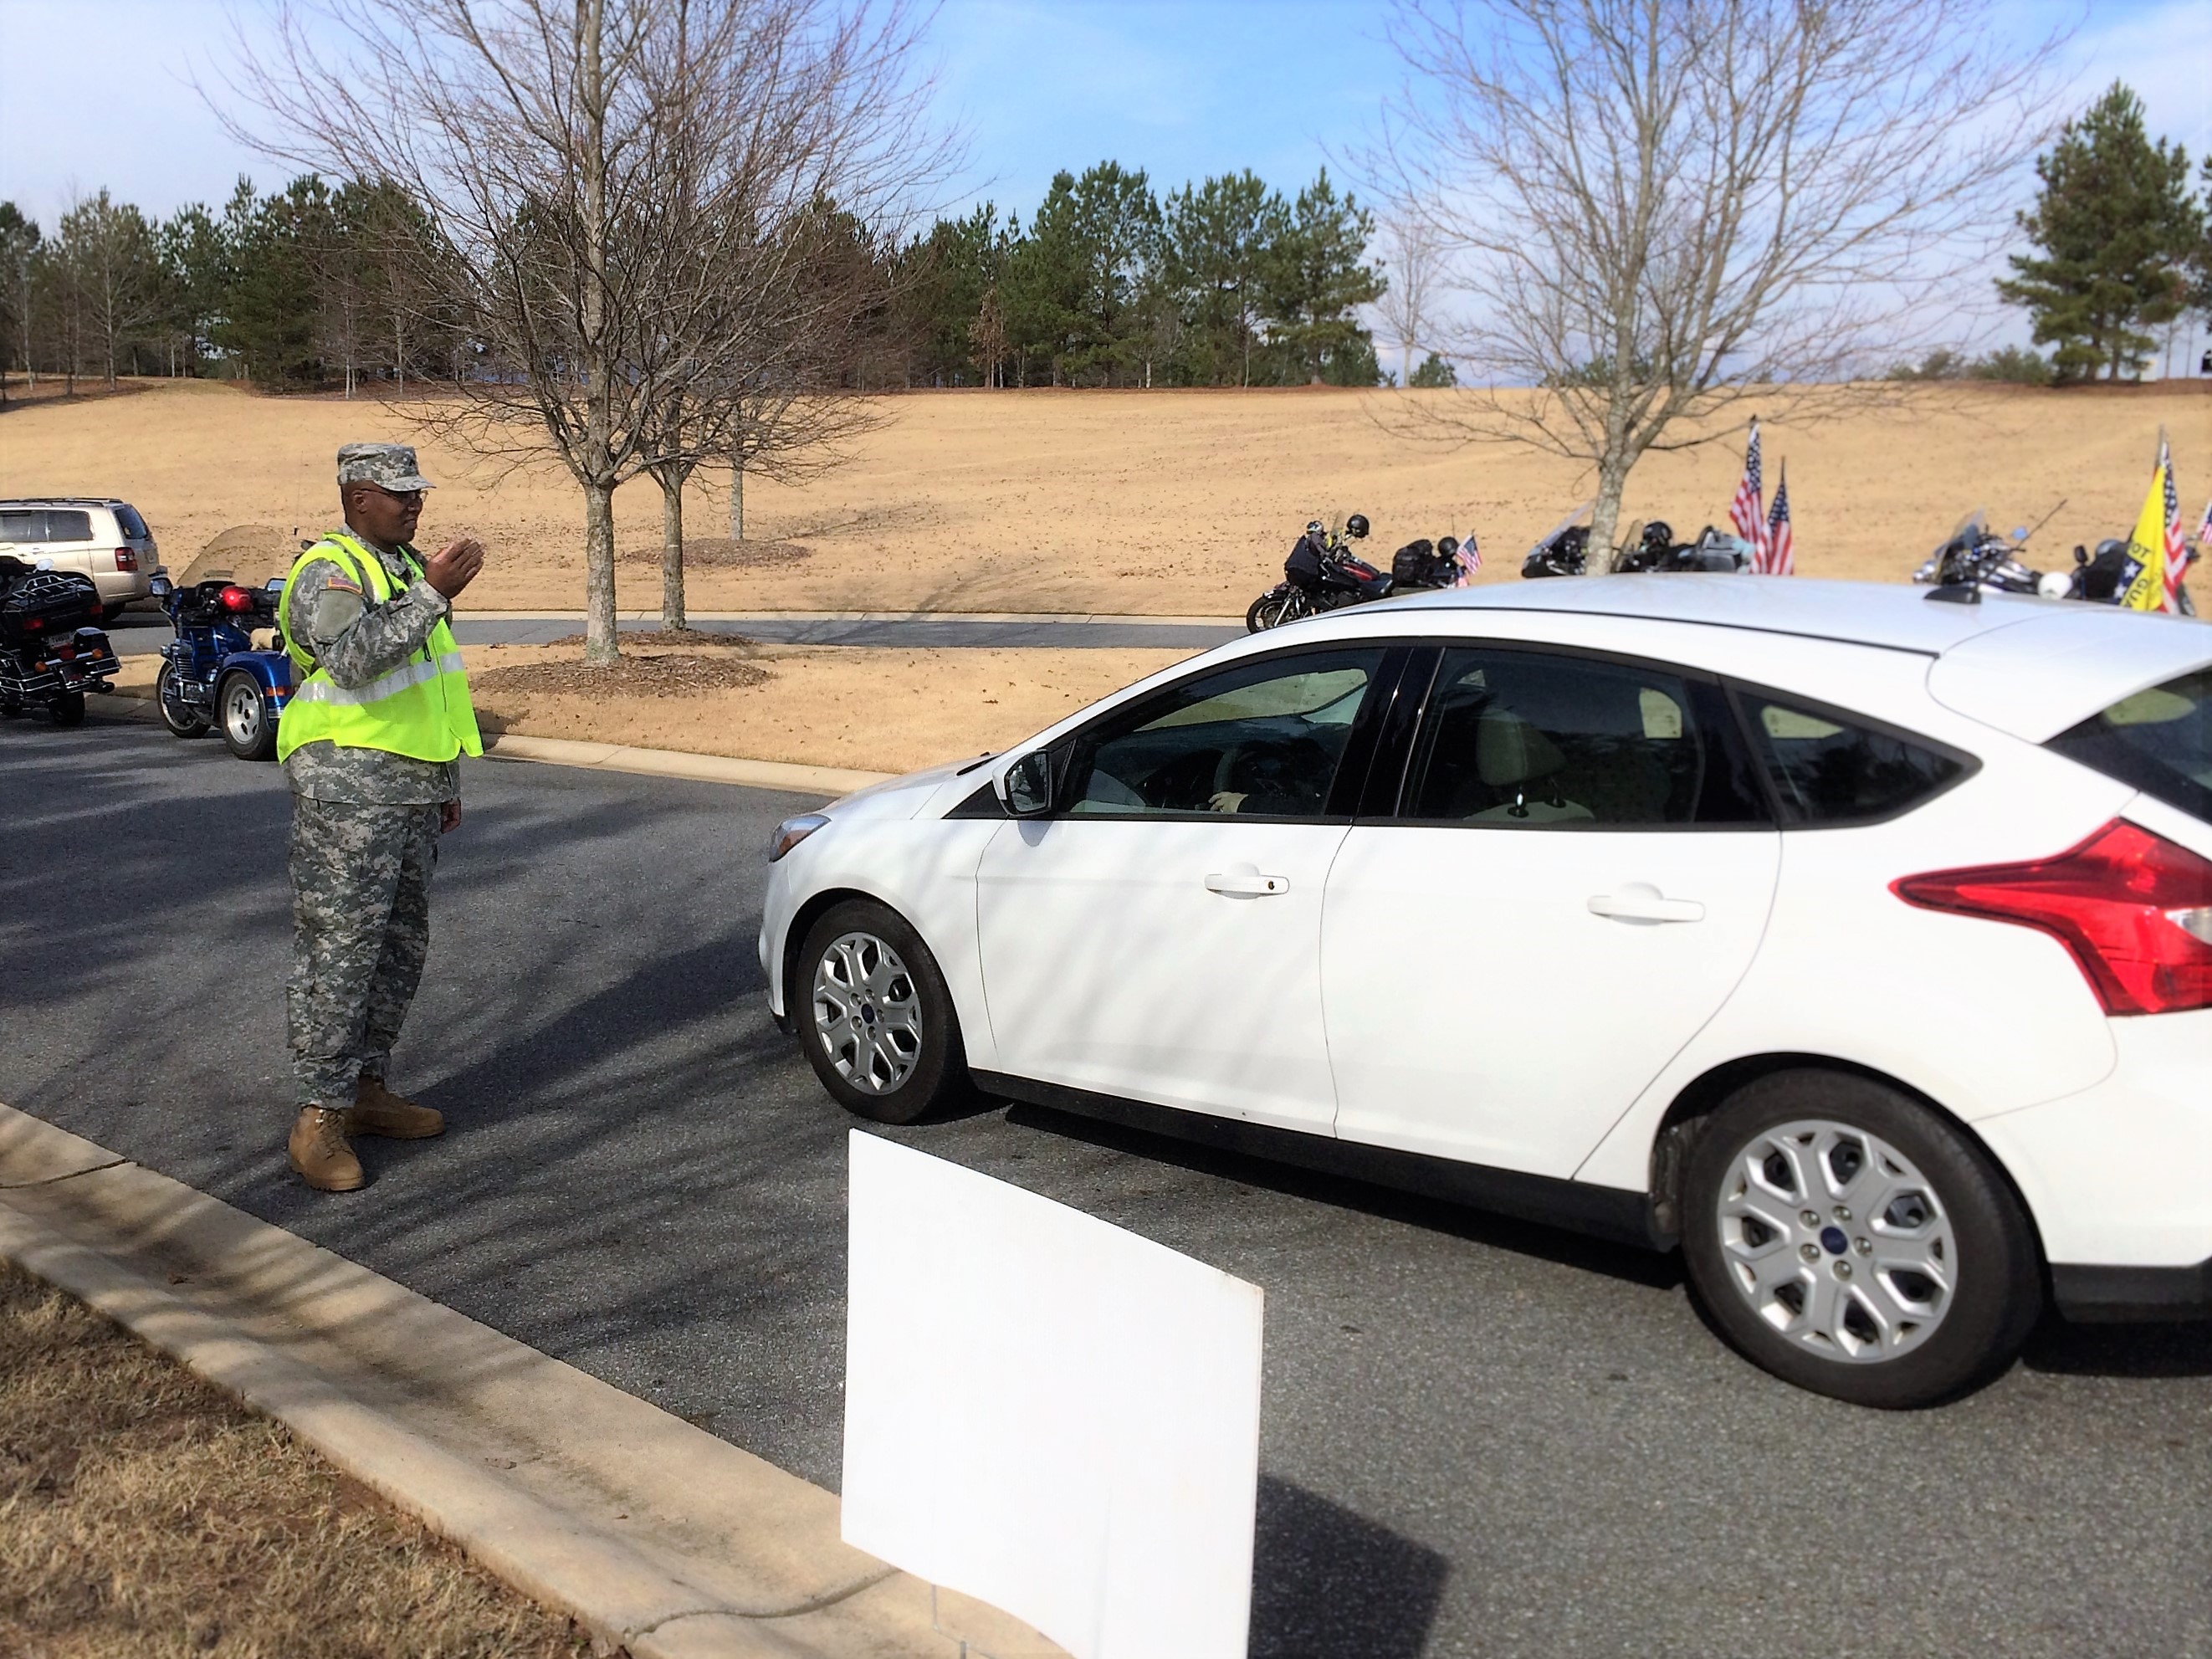 GEORGIA NATIONAL CEMETERY, Canton, Georgia, December 12, 2015 – Cpl. Robert Williams from 1st Brigade directs traffic during the event. (Georgia State Defense Force photo by Pvt. Michael Chapman, Public Affairs Office)